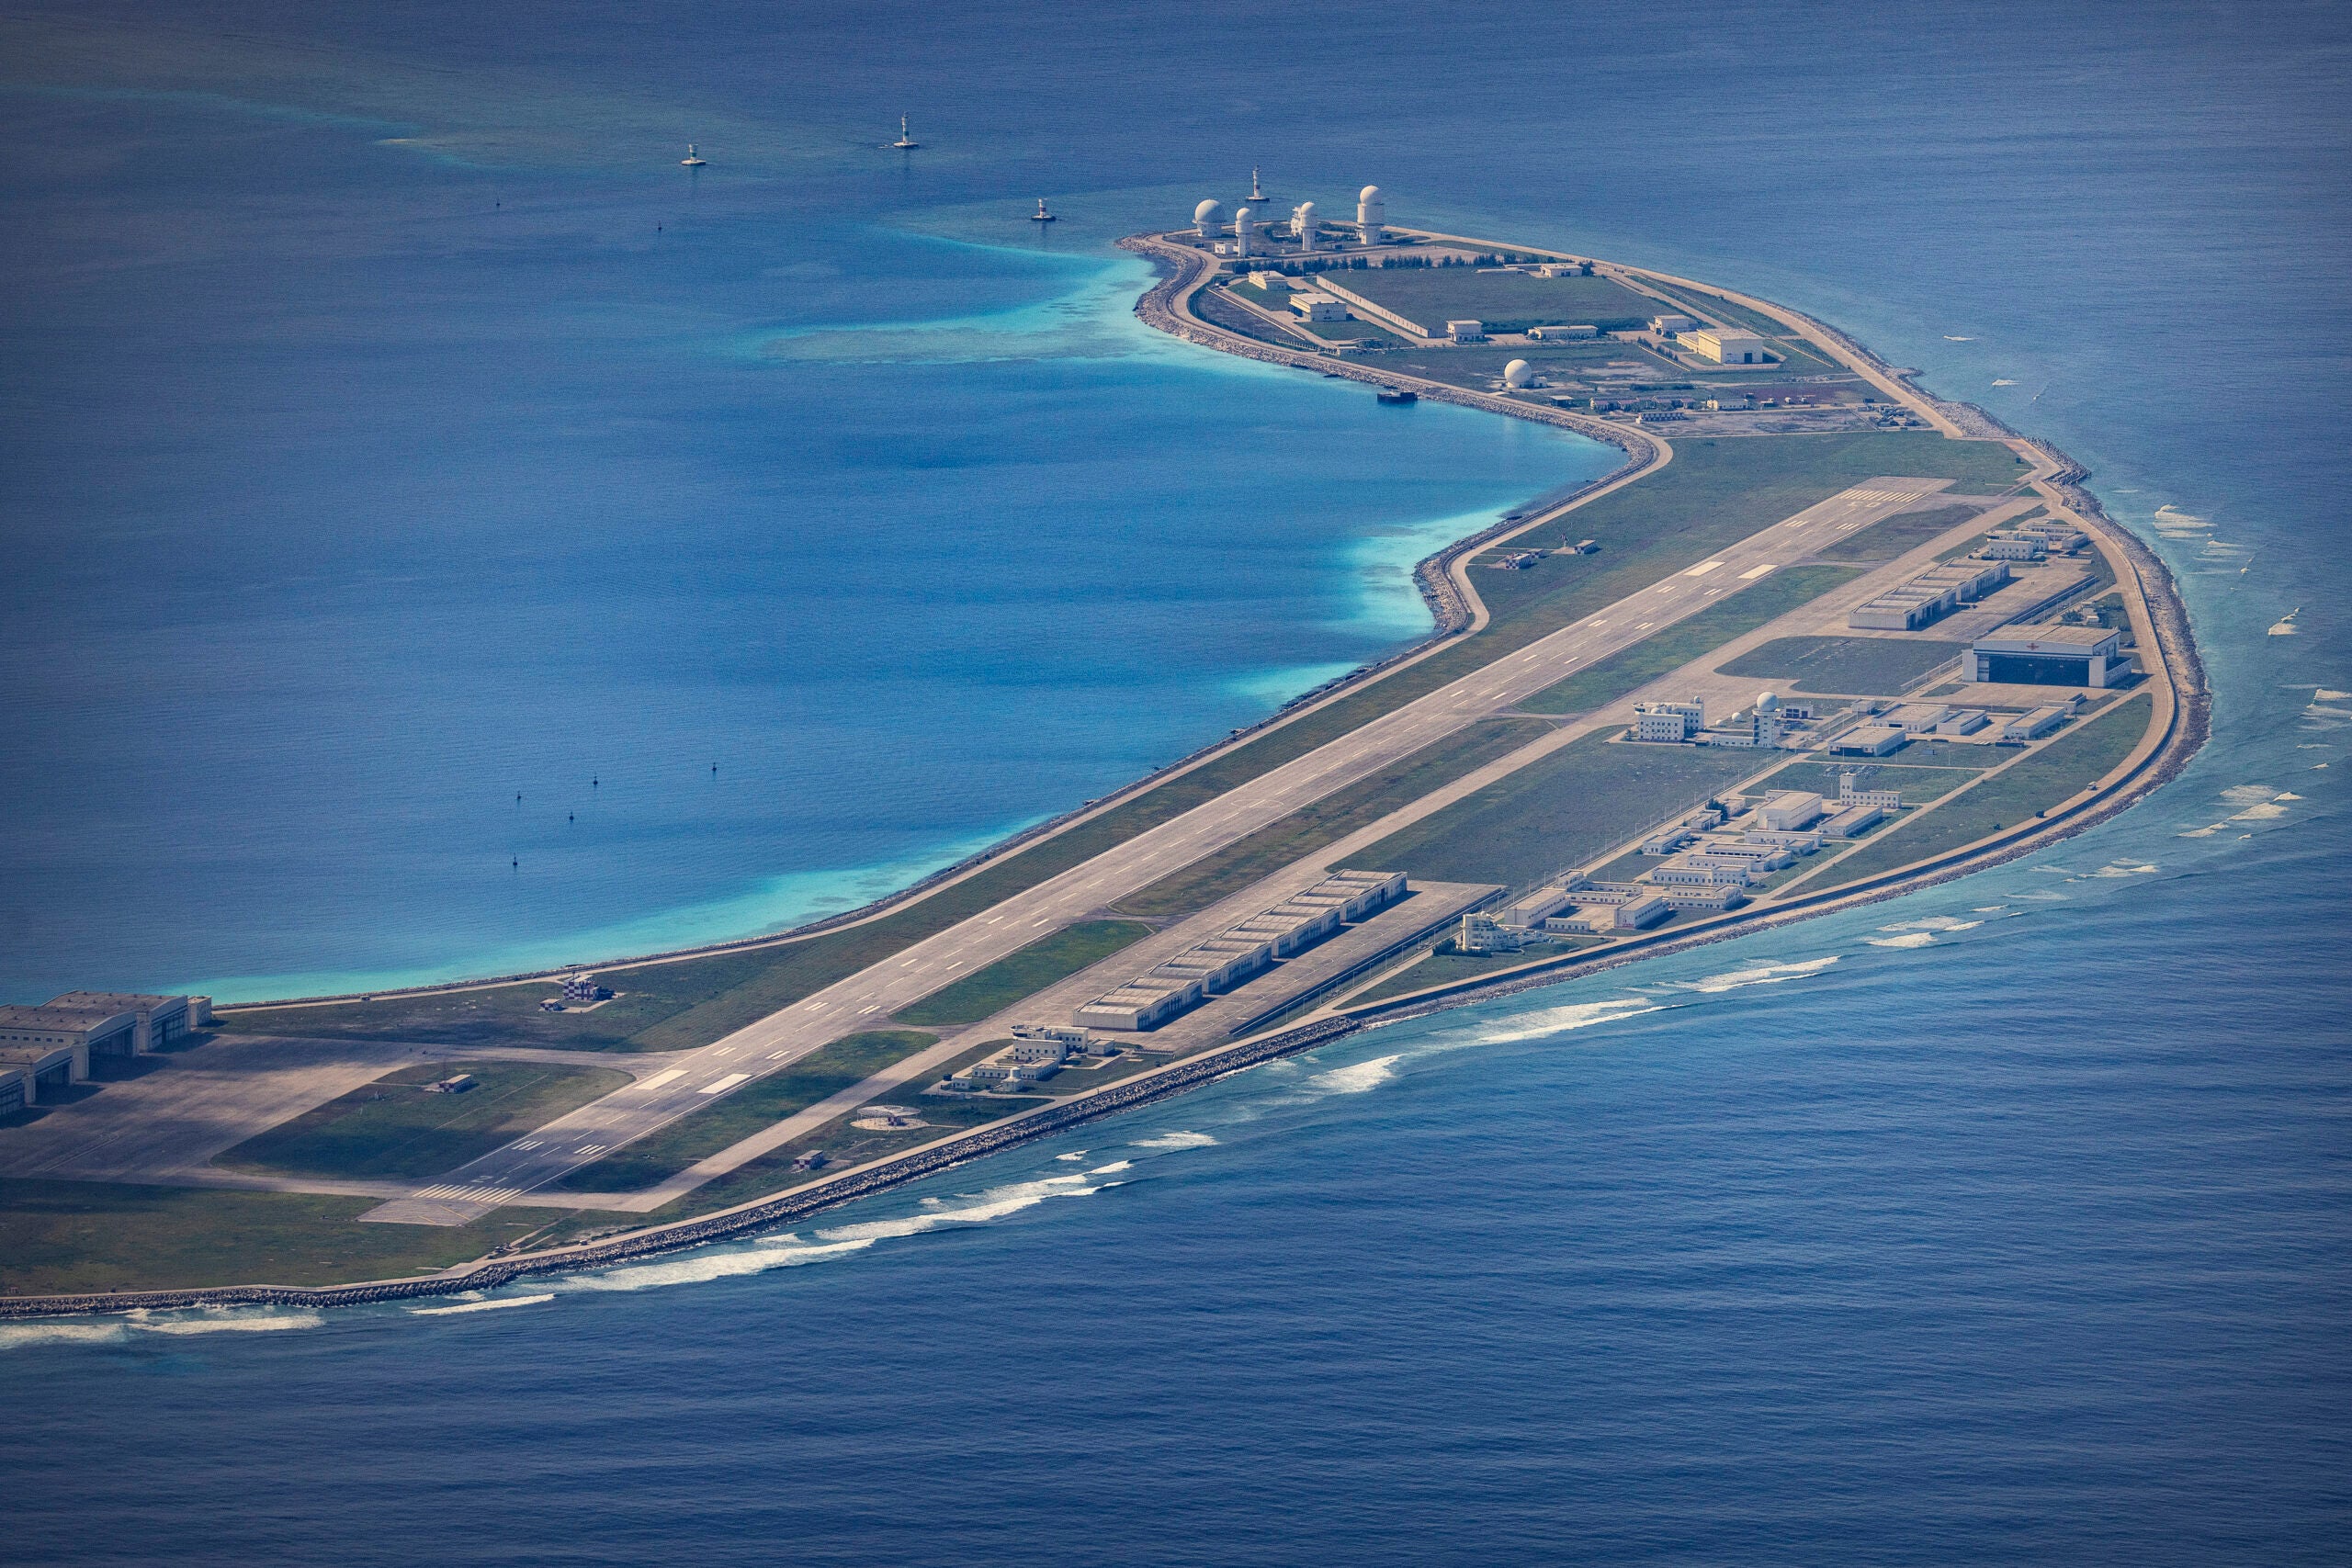 SPRATLY ISLANDS, AT SEA - OCTOBER 25: An airfield, buildings, and structures are seen on the artificial island built by China in Mischief Reef on October 25, 2022 in Spratly Islands, South China Sea. China has progressively asserted its claim of ownership over disputed islands in the South China Sea by artificially increasing the size of islands, creating new islands and building ports, military outposts and airstrips. The South China sea is an important trade route and is of significant interest as geopolitical tensions remain high in the region. (Photo by Ezra Acayan/Getty Images)